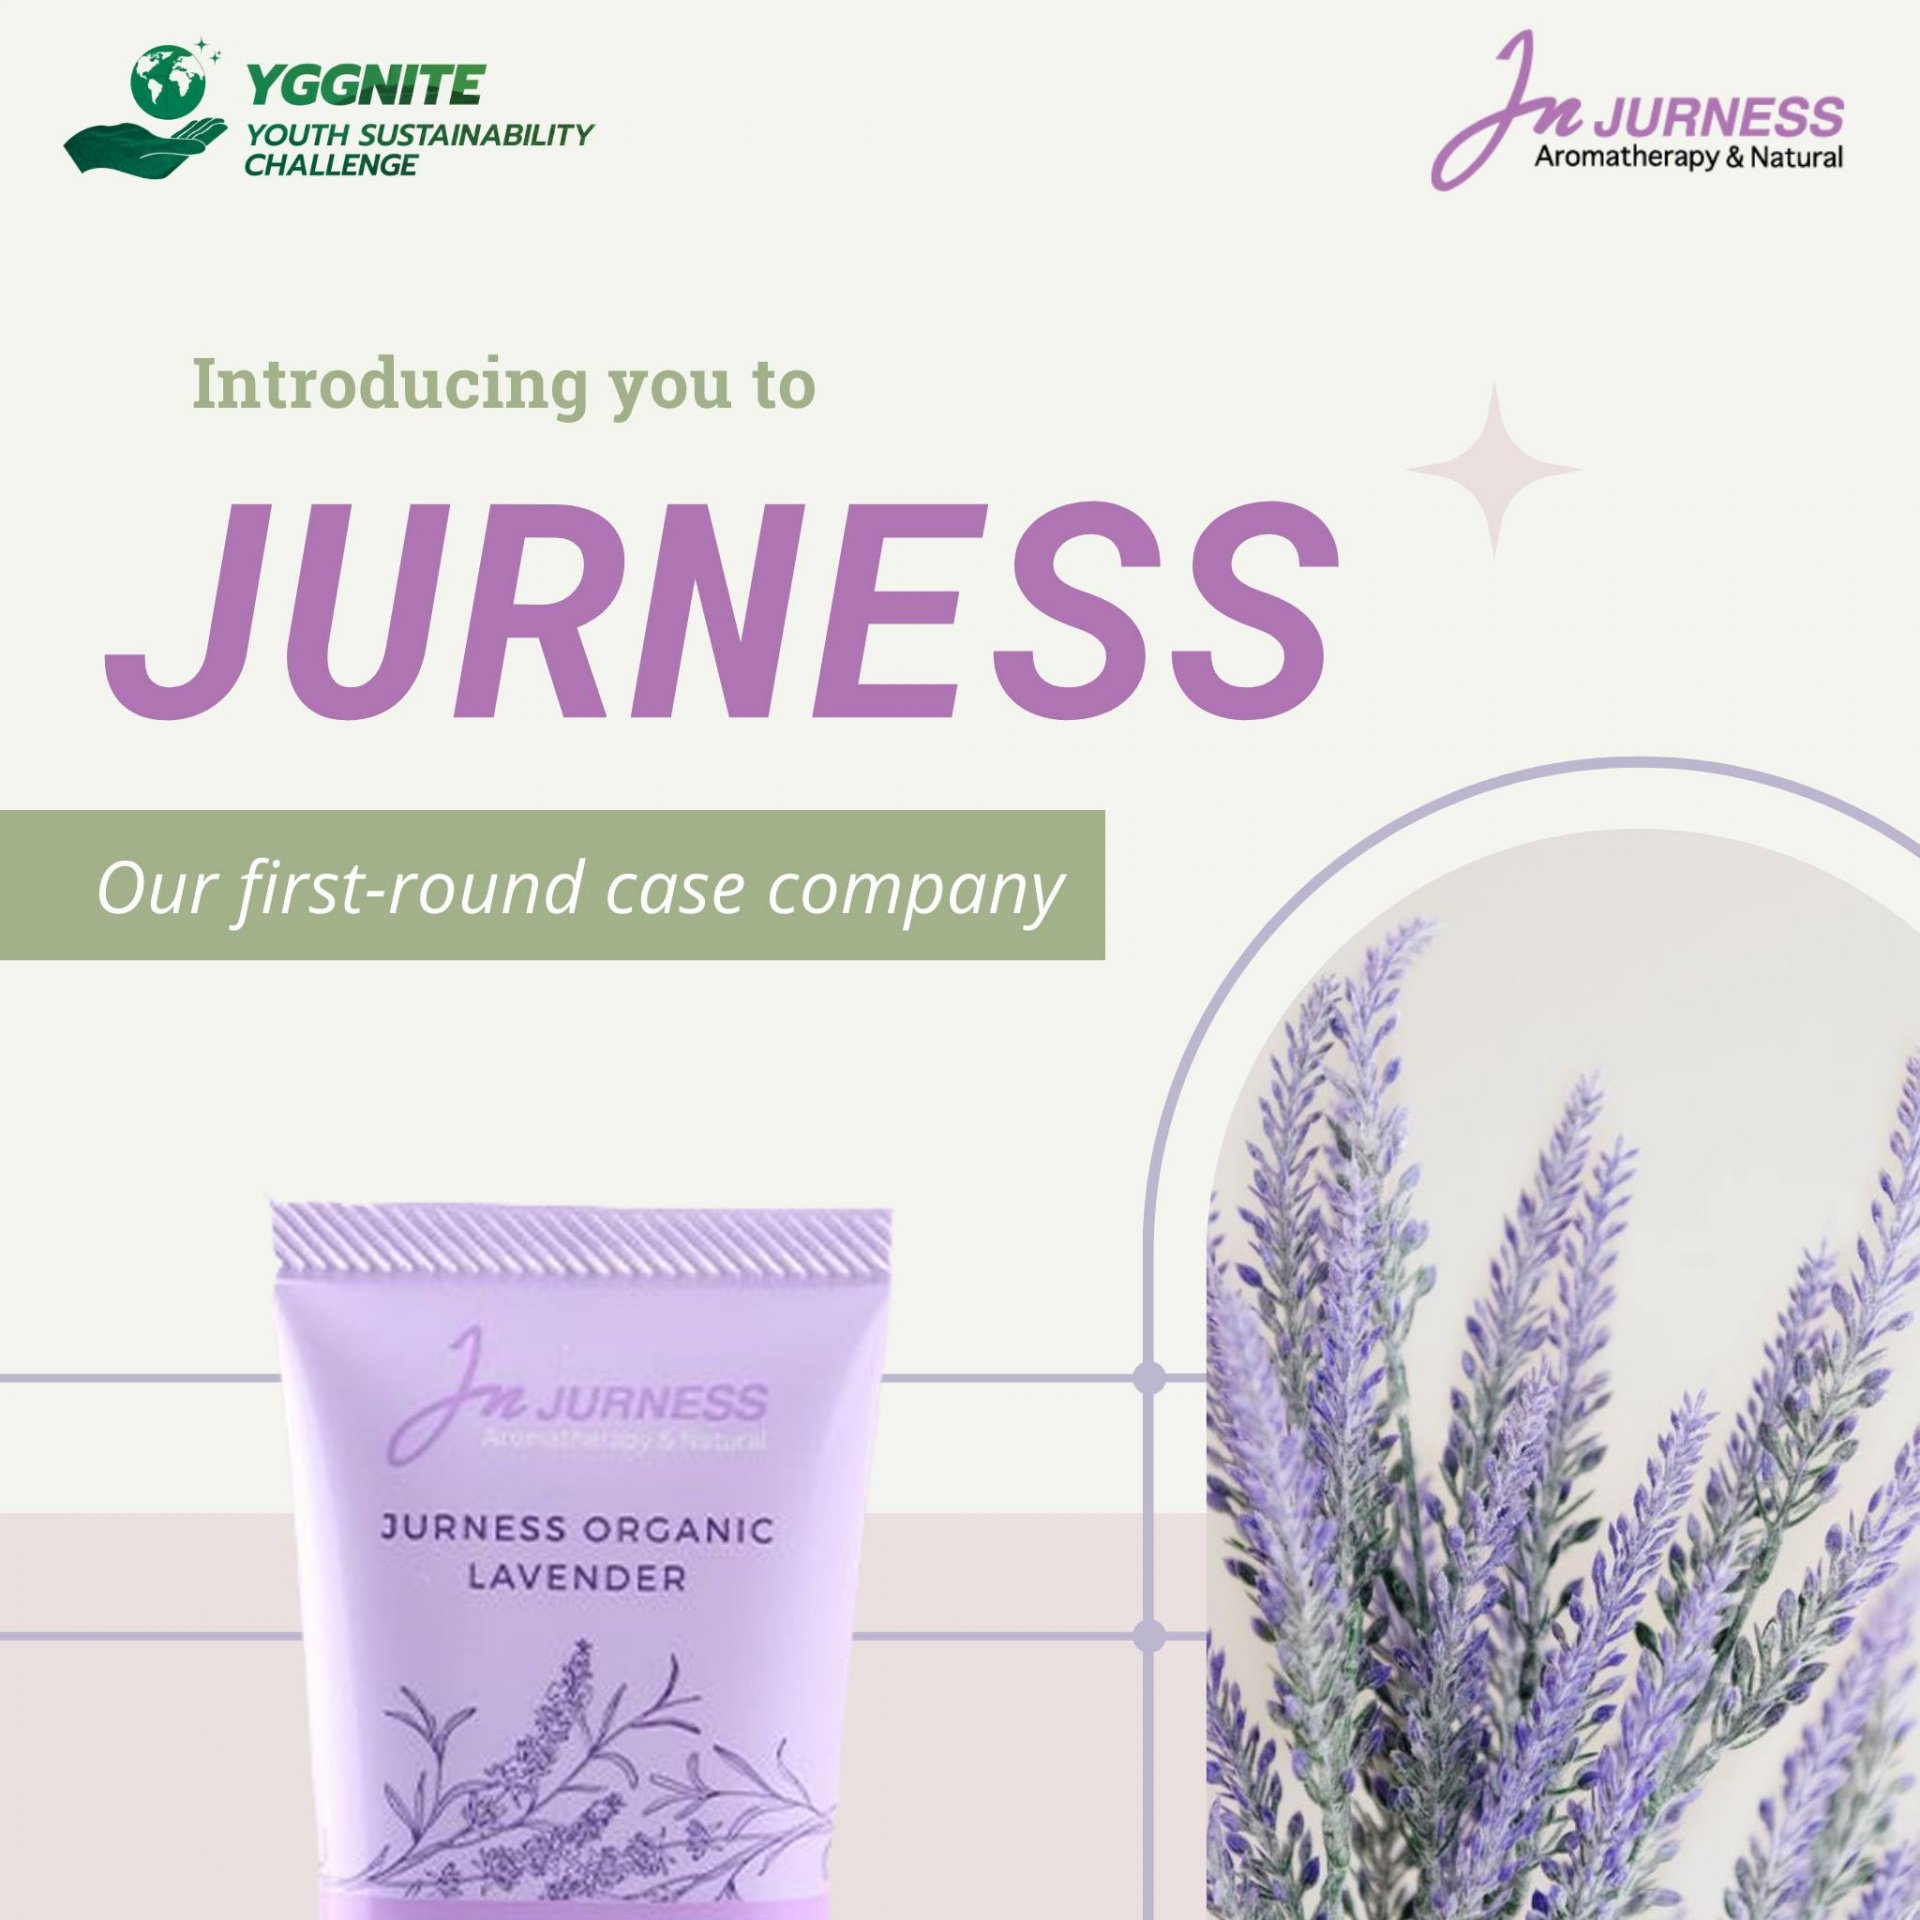 JURNESS is a main sponsor for YGGNITE 2021 Sustainability Competition